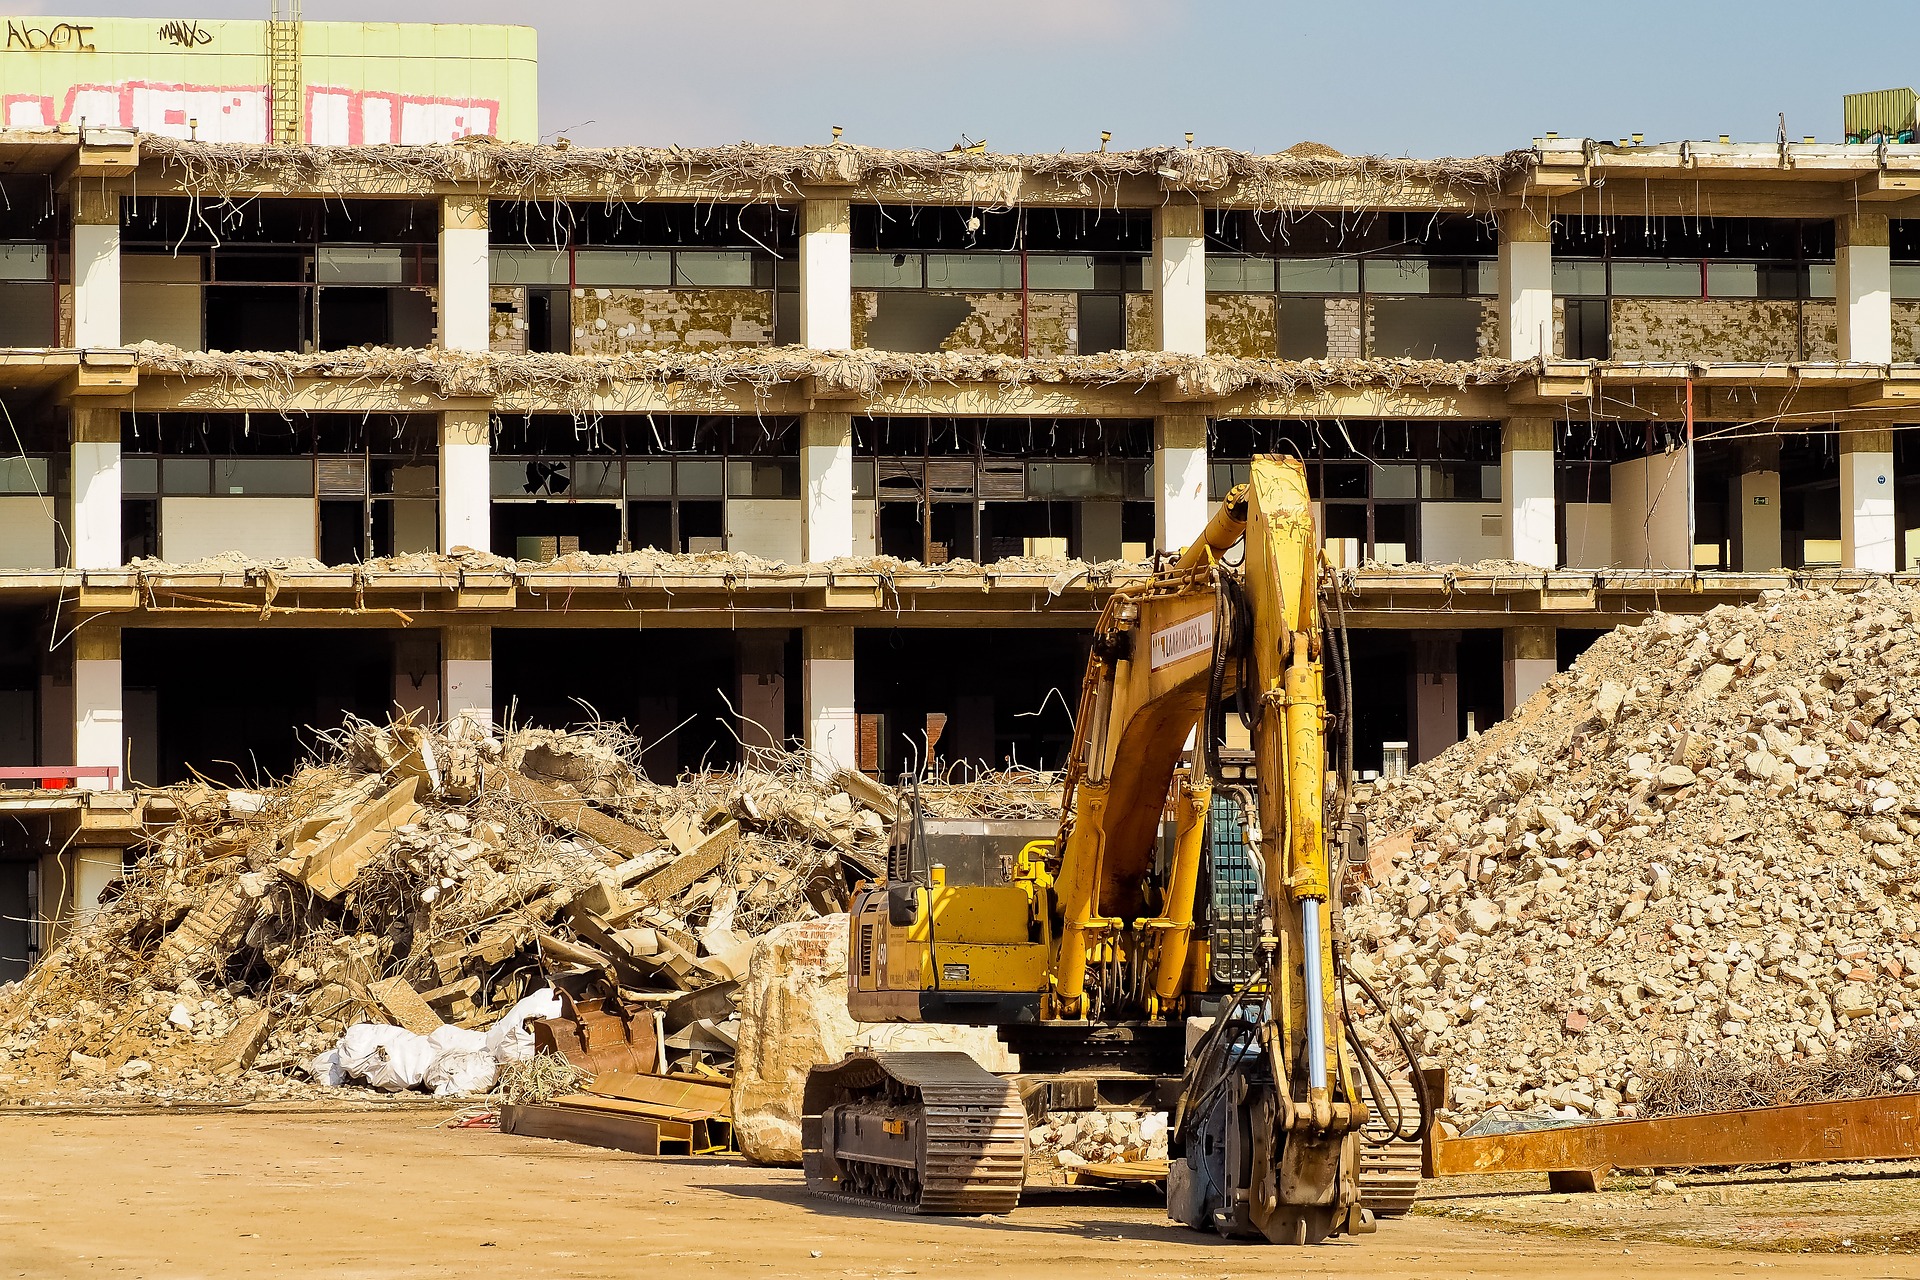 The demolition of entire building complexes is controversial, but quite common.